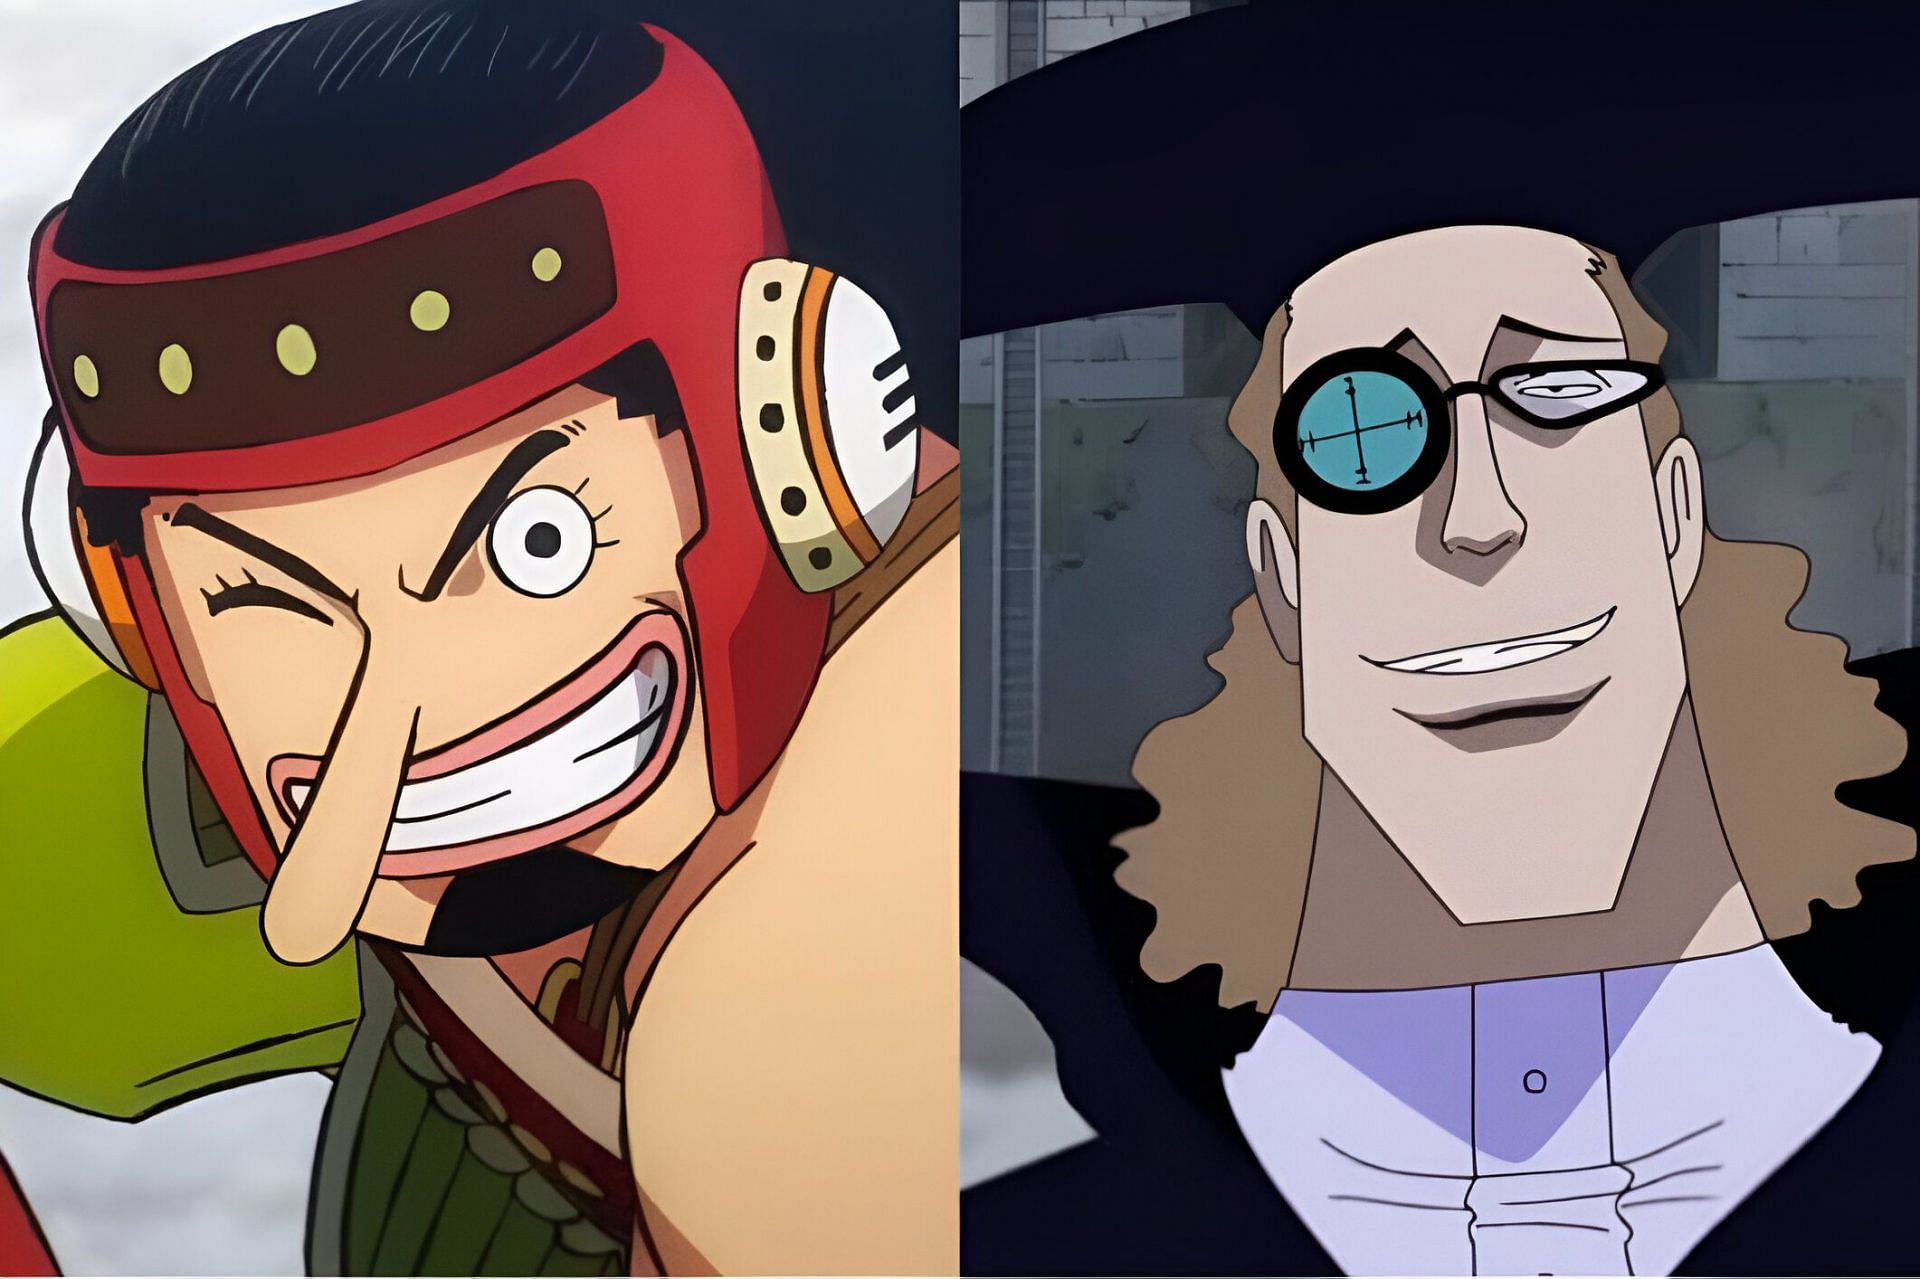 Usopp (left) and Van Augur (right) as seen in the anime (Image via Toei Animation)